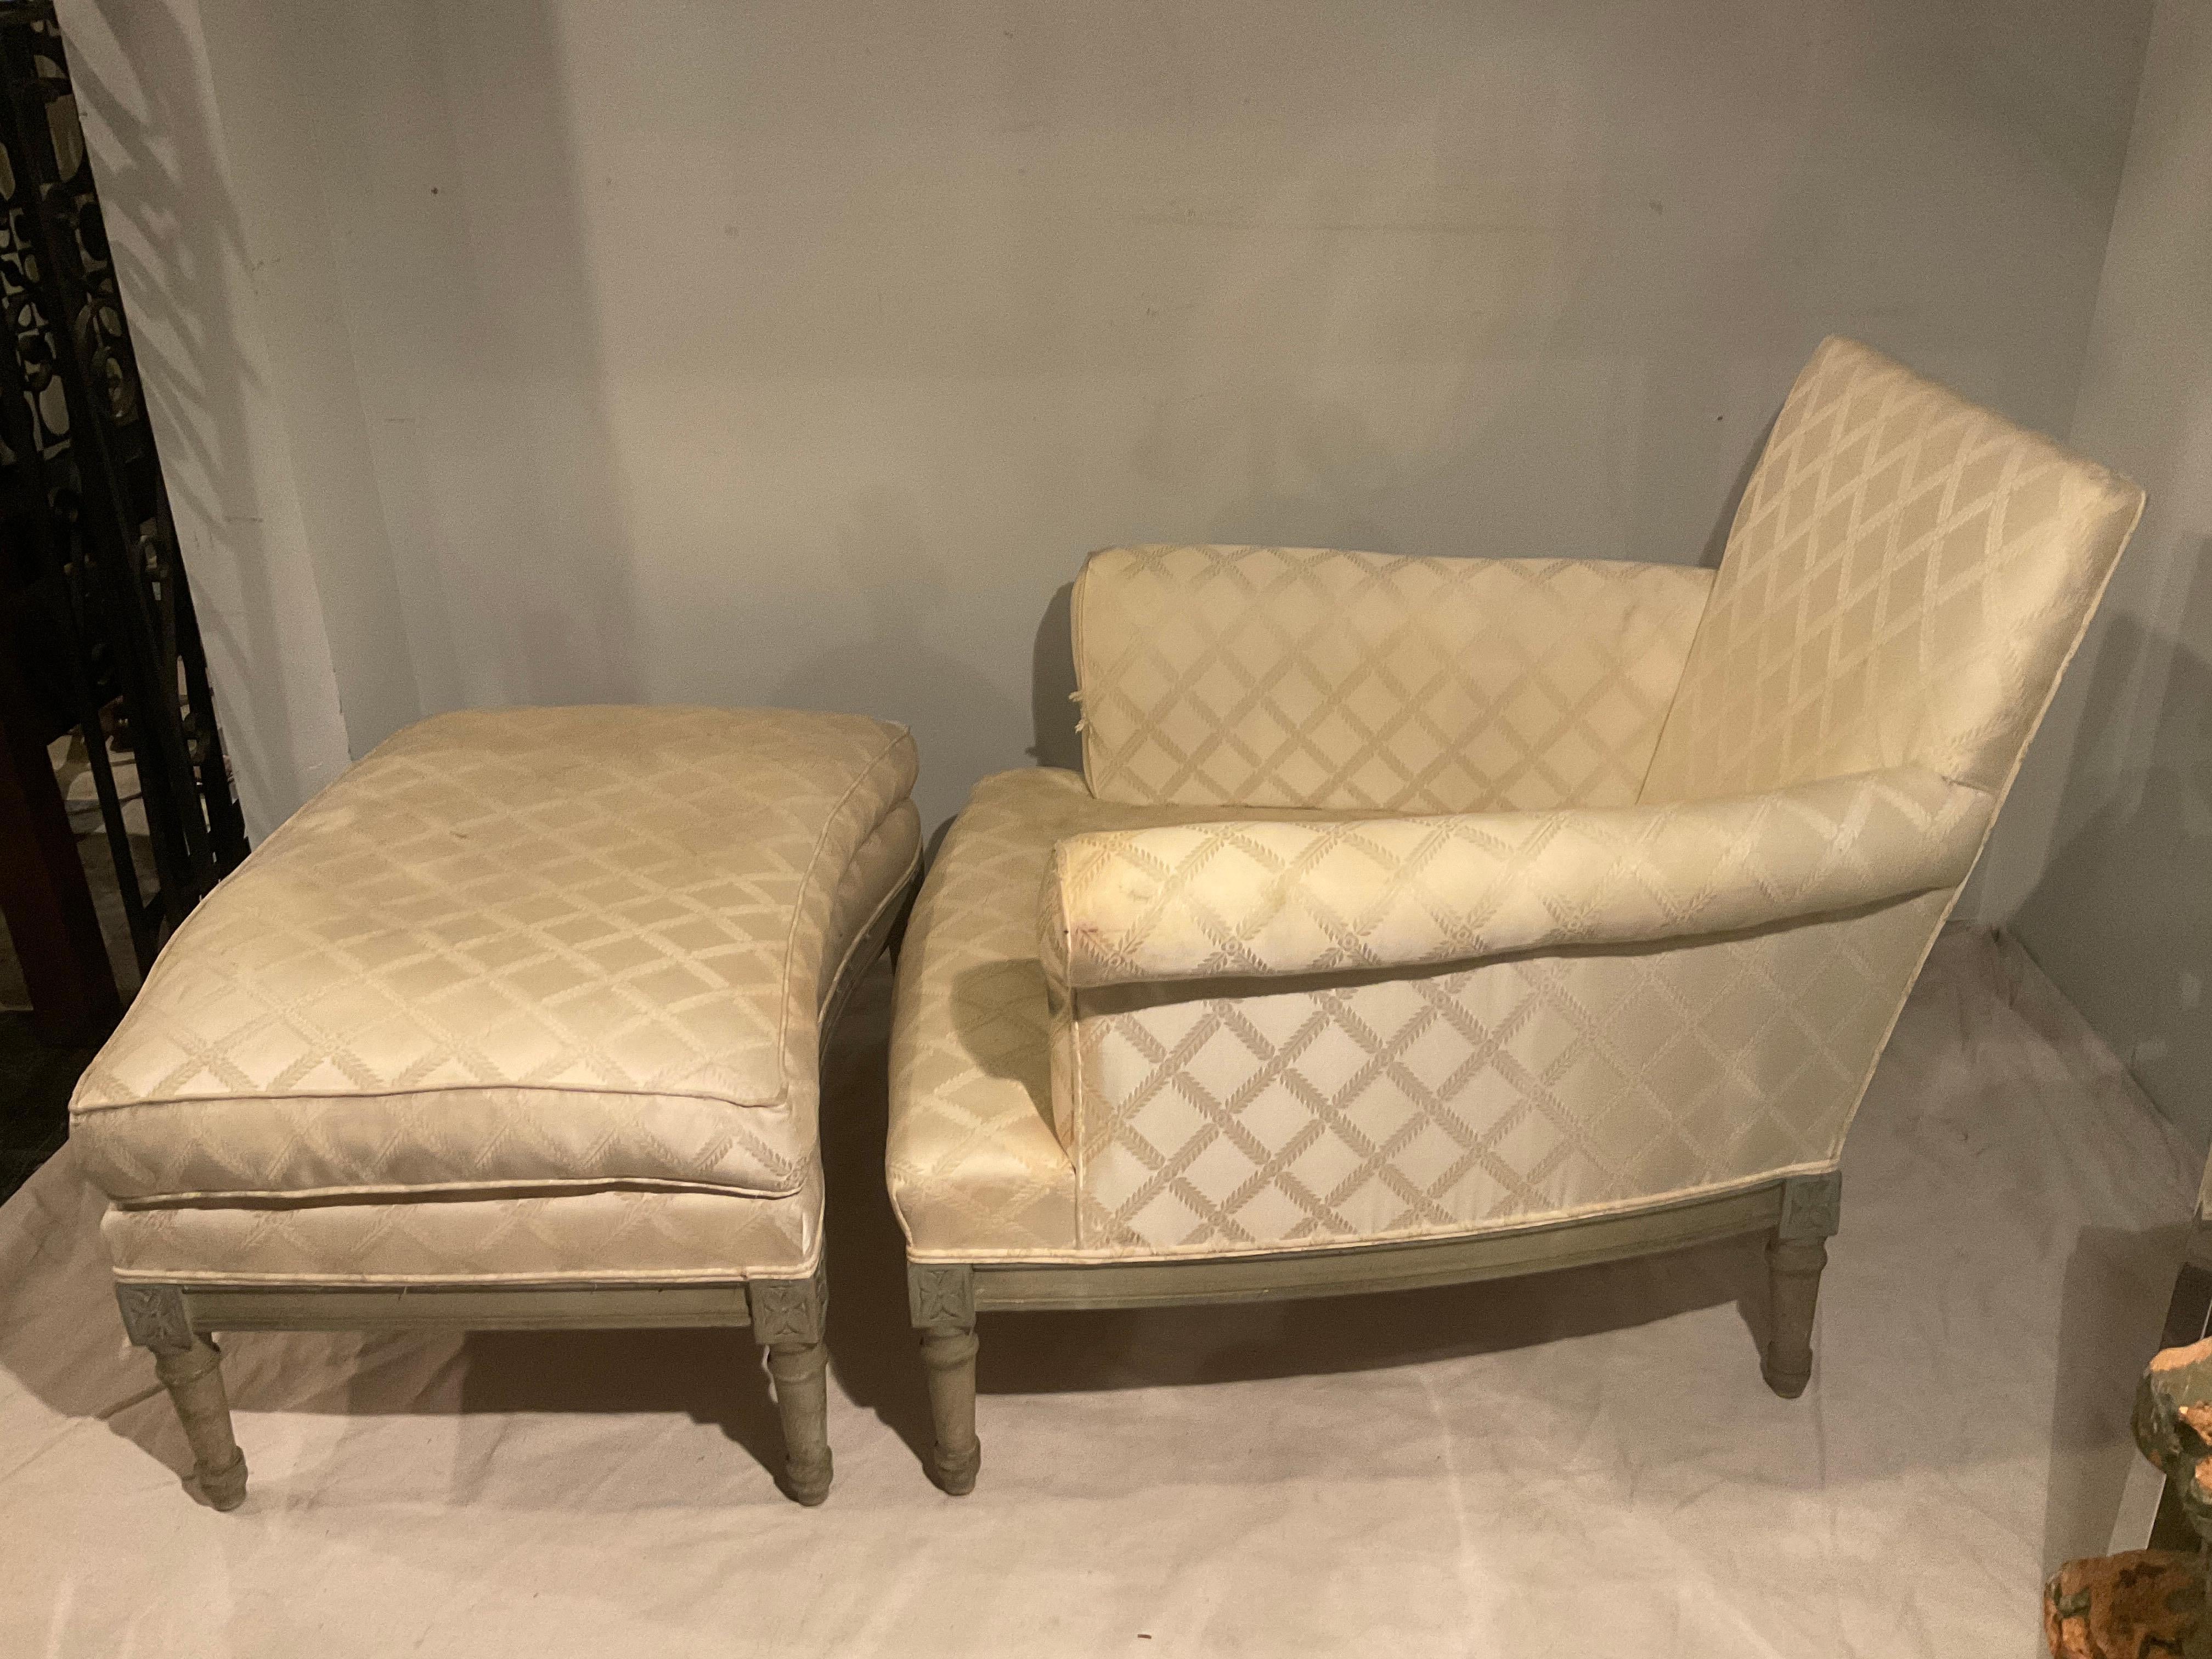 1950s French lounge chair and curved ottoman.
Chair needs reupholstering. Chair had wood filler applied on frame, as seen in image 10. Needs to be better repaired.